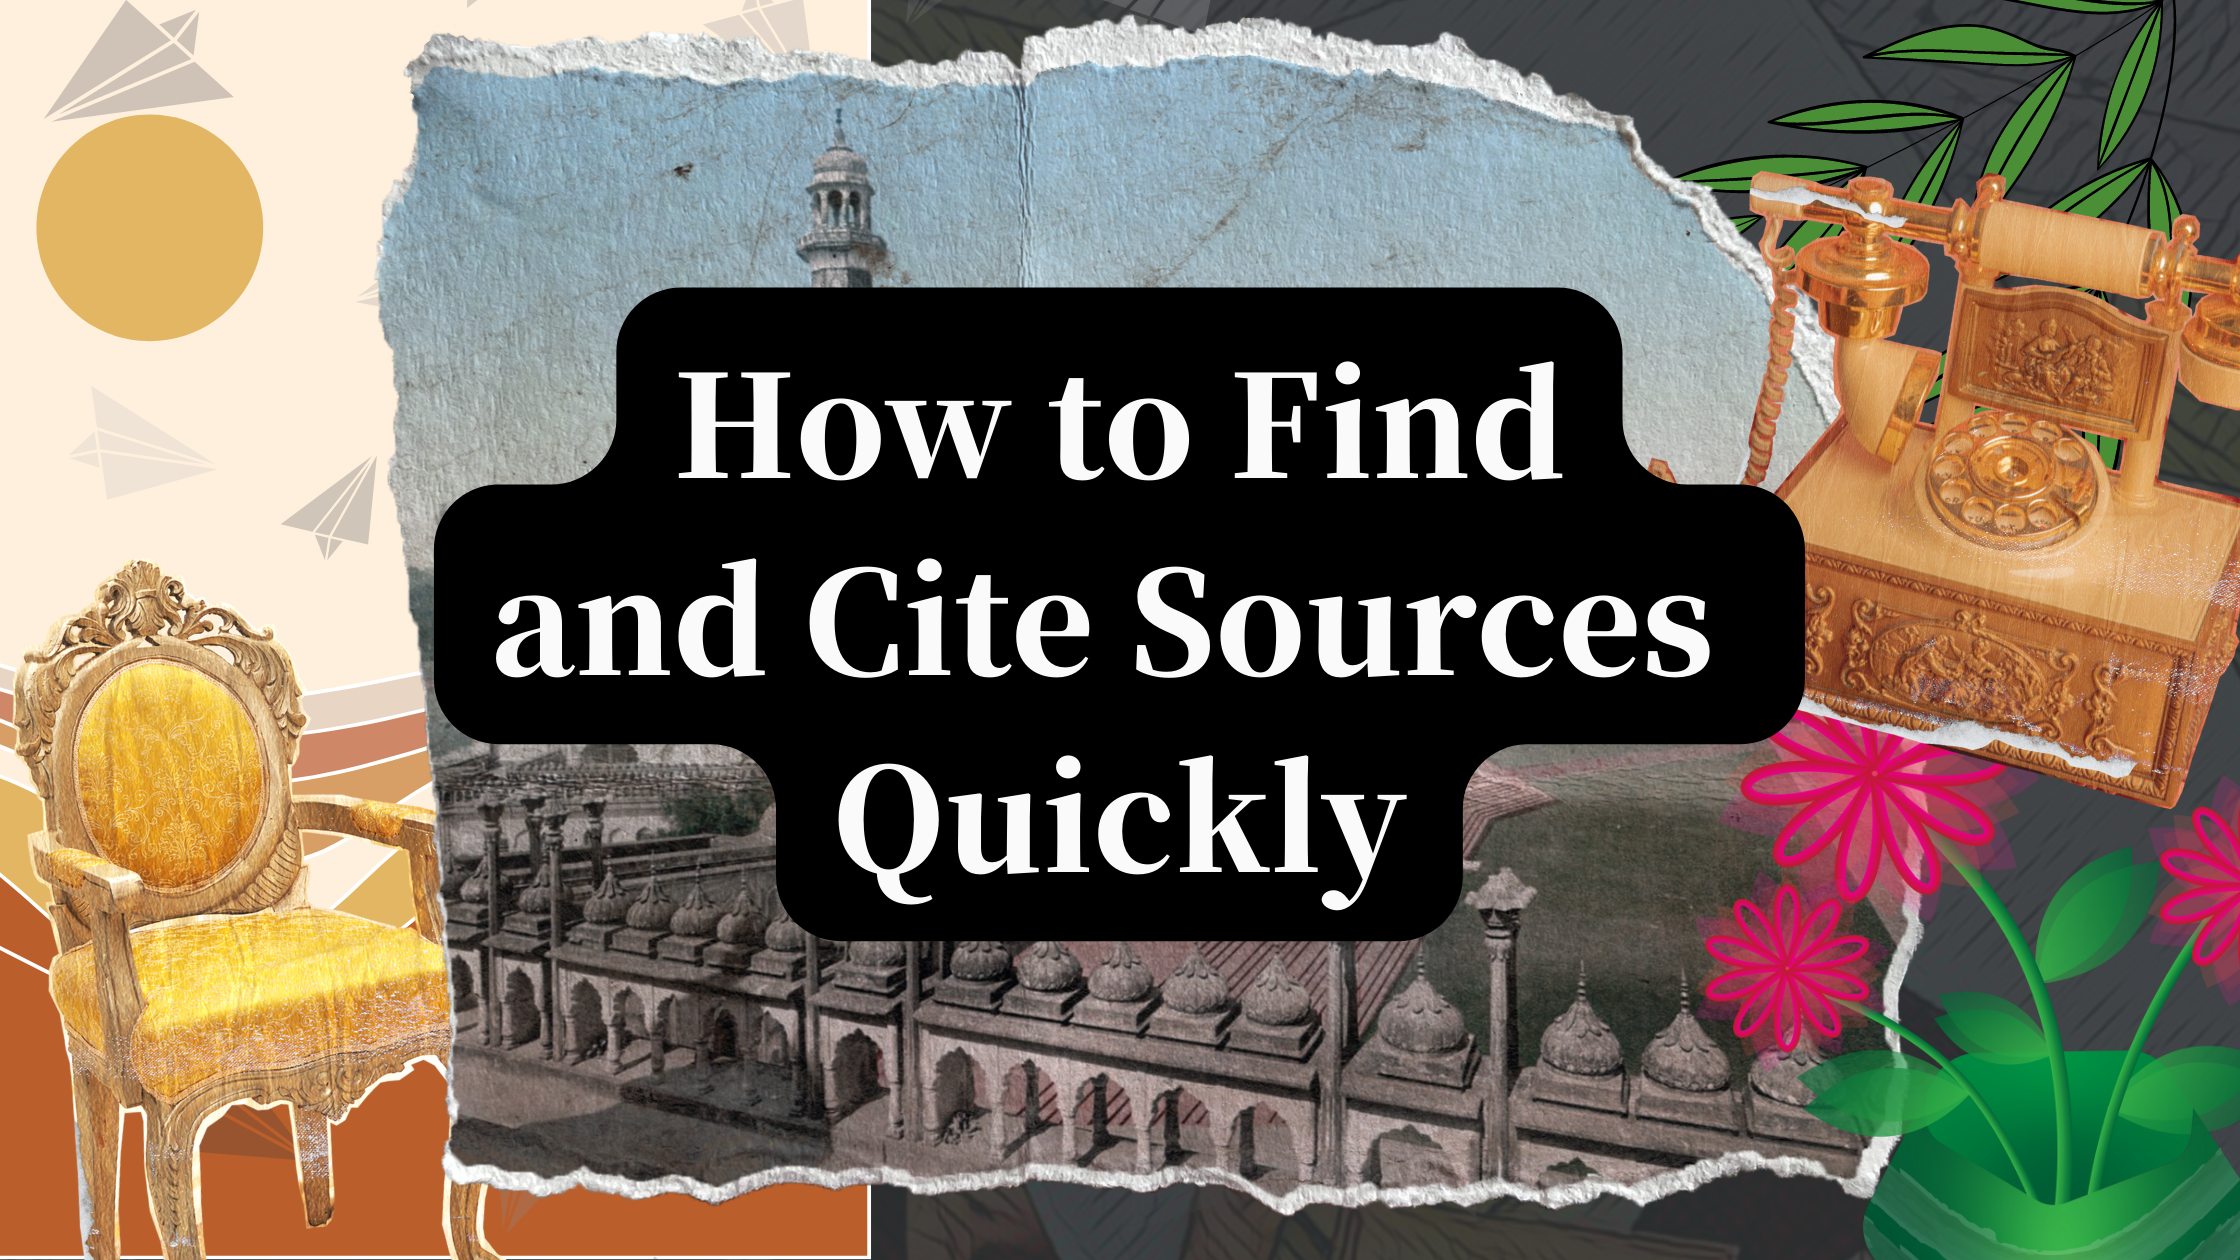 How to Cite Sources in Articles (And 3 Tips for Doing So Quickly)